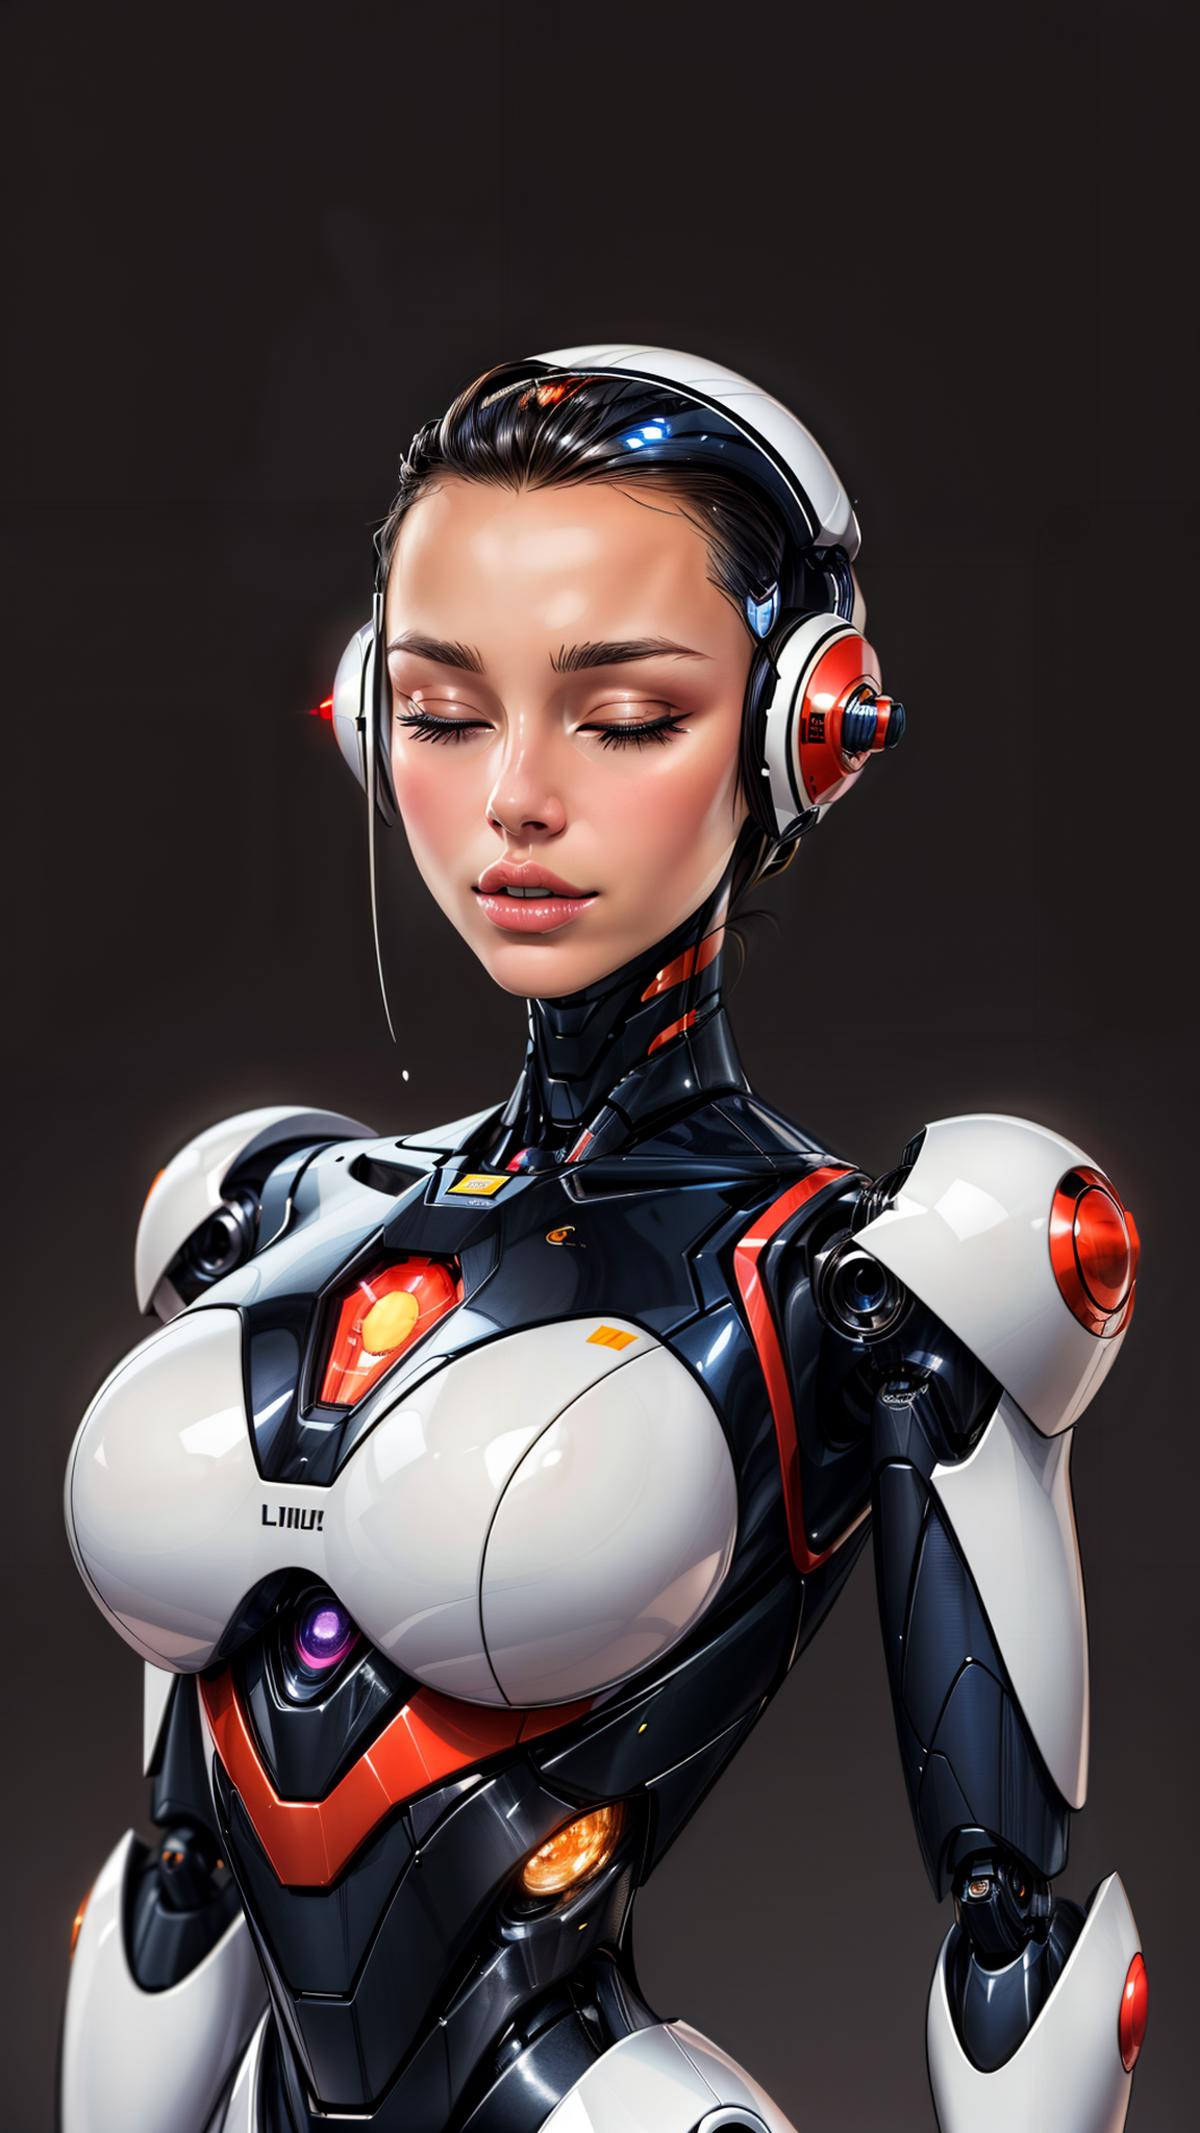 A digital artwork of a woman wearing a futuristic dress with headphones on her ears.